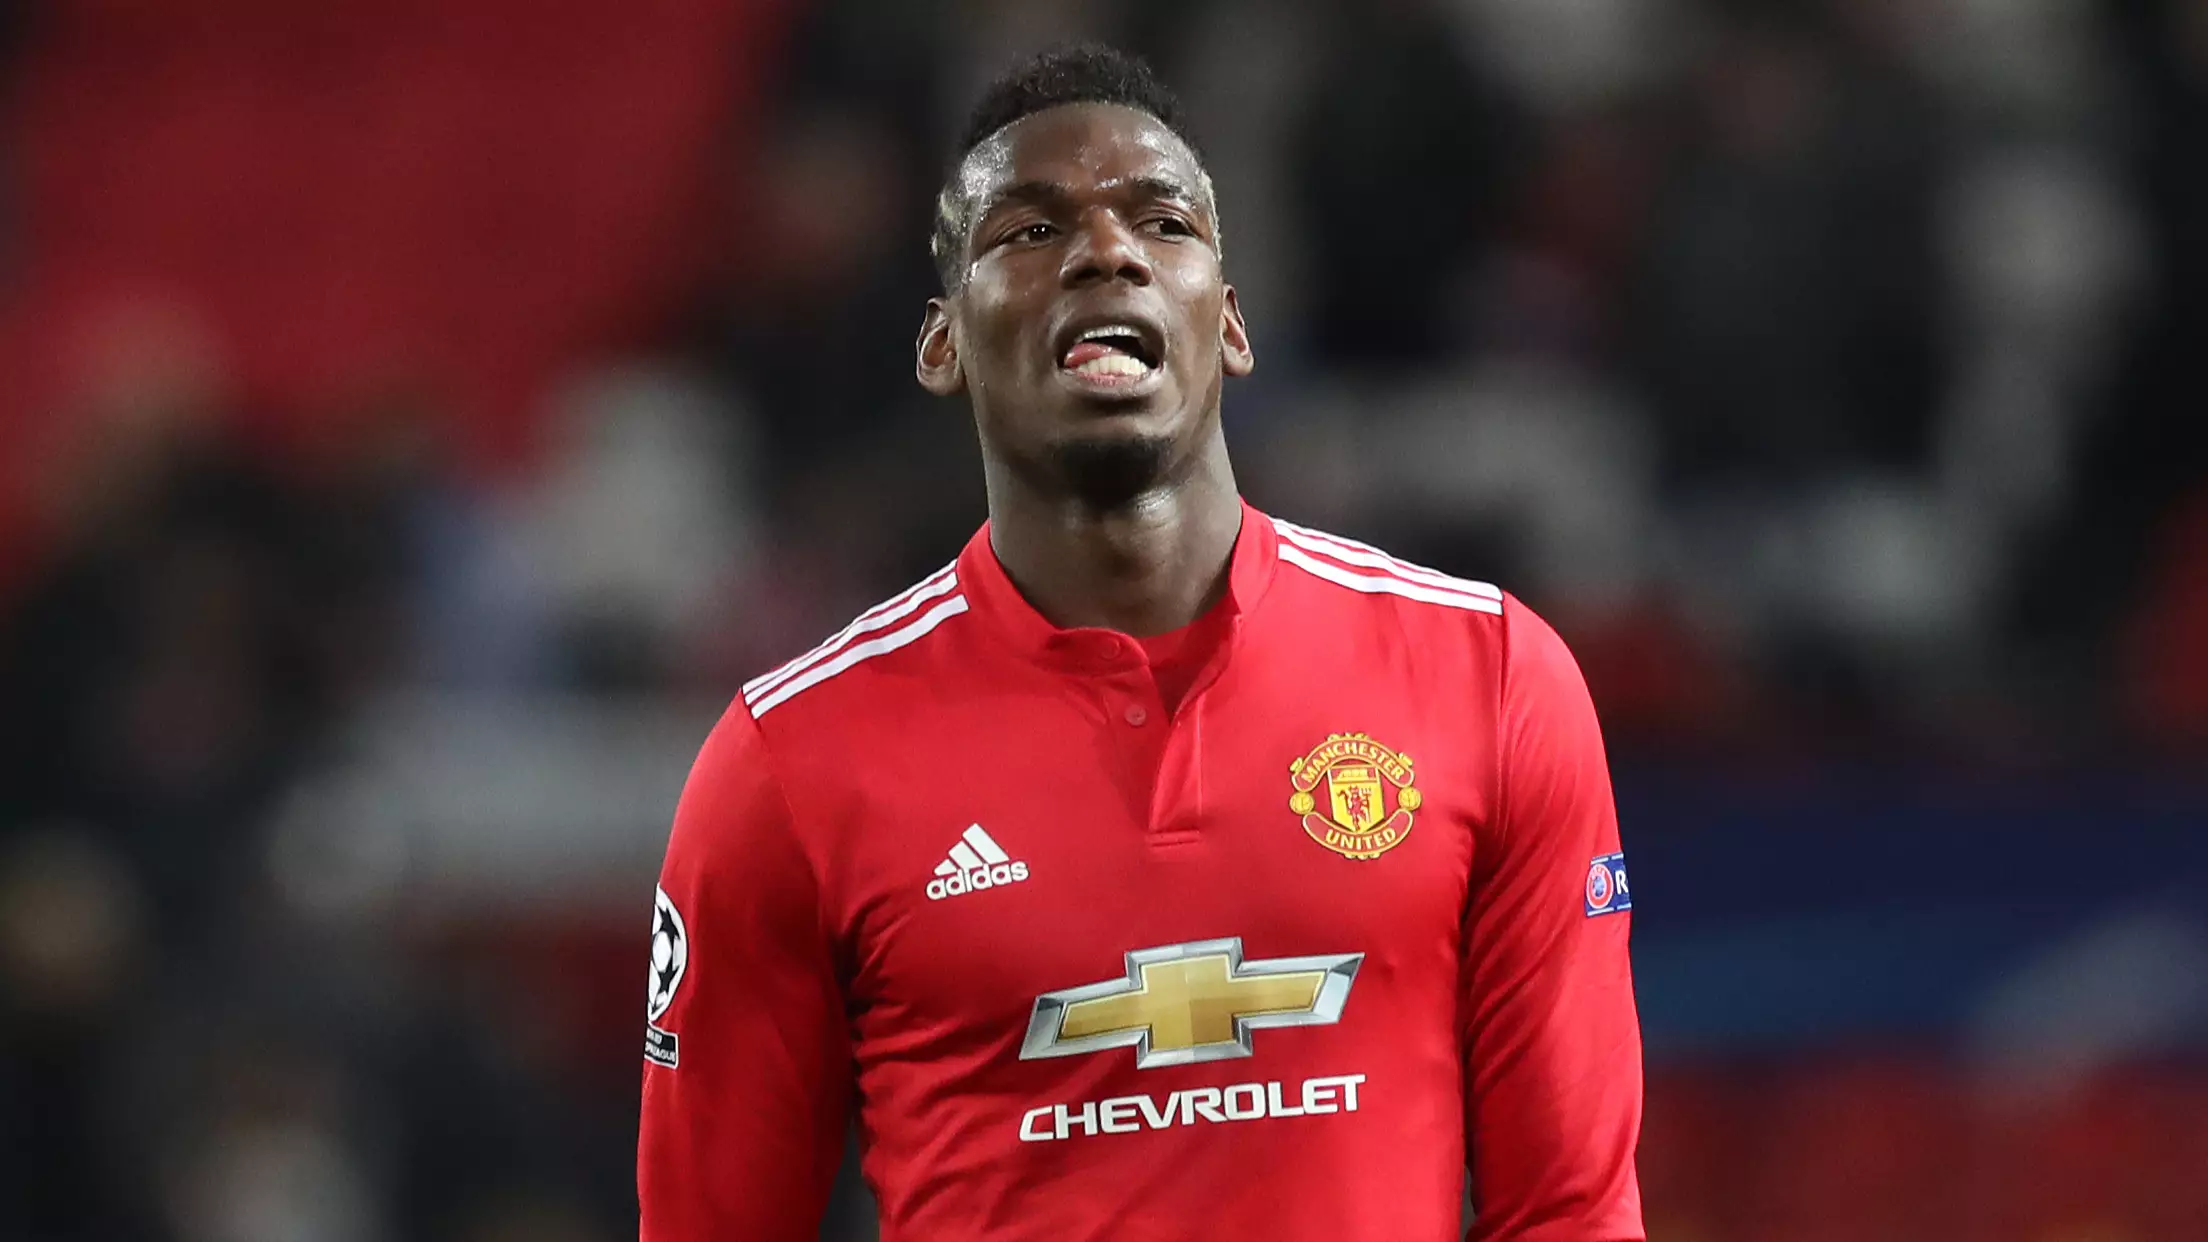 Could Pogba end up at Barcelona? Image: PA Images